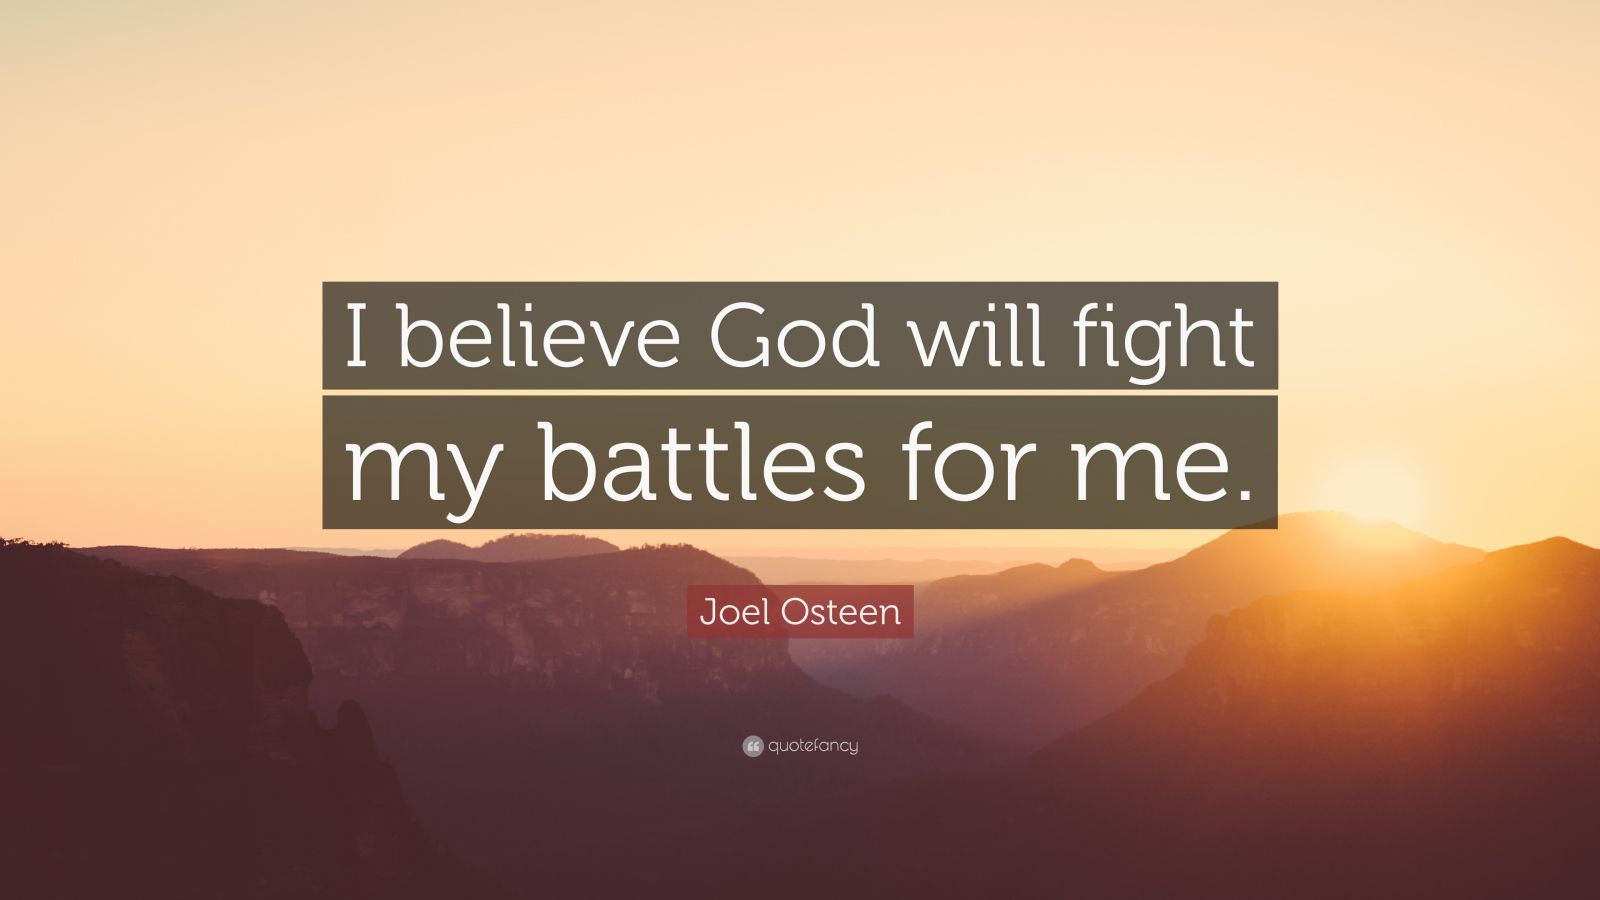 Download Joel Osteen Quote: "I believe God will fight my battles ...